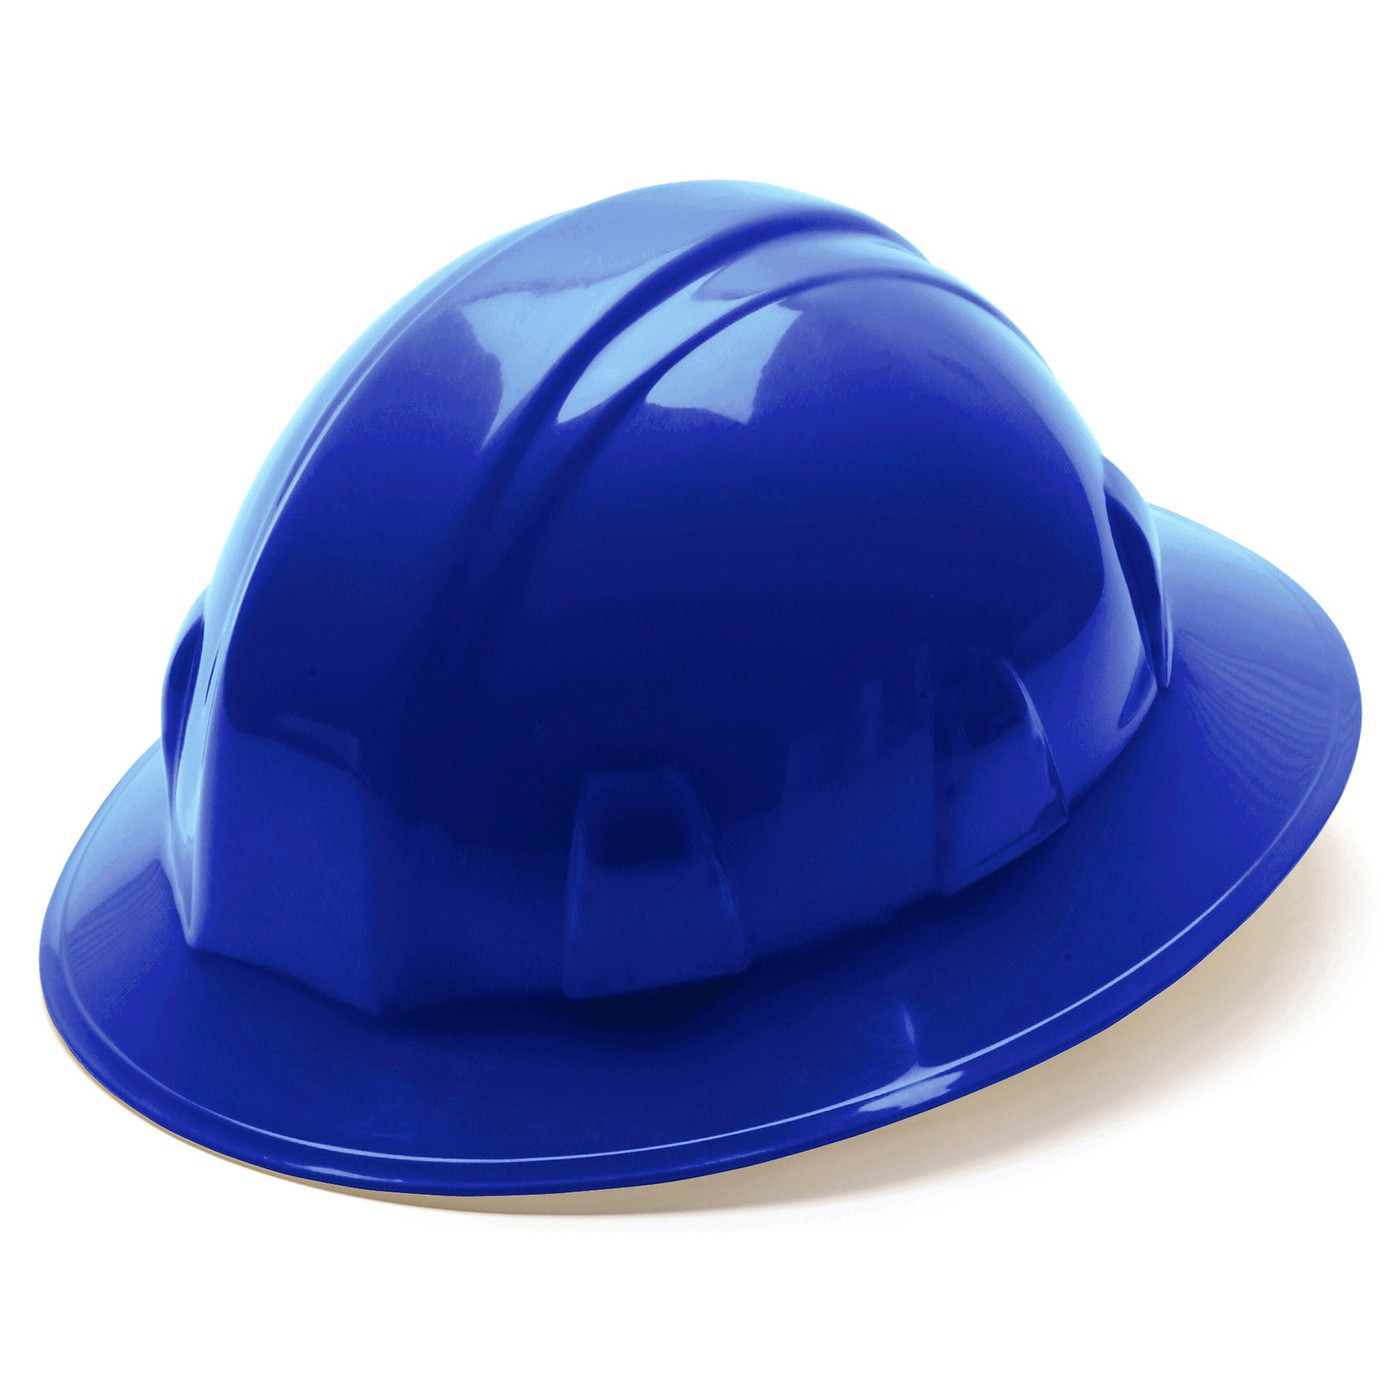 Pyramex SL Series Full Brim Hard Hat with 6 Point Ratchet Suspension from Columbia Safety